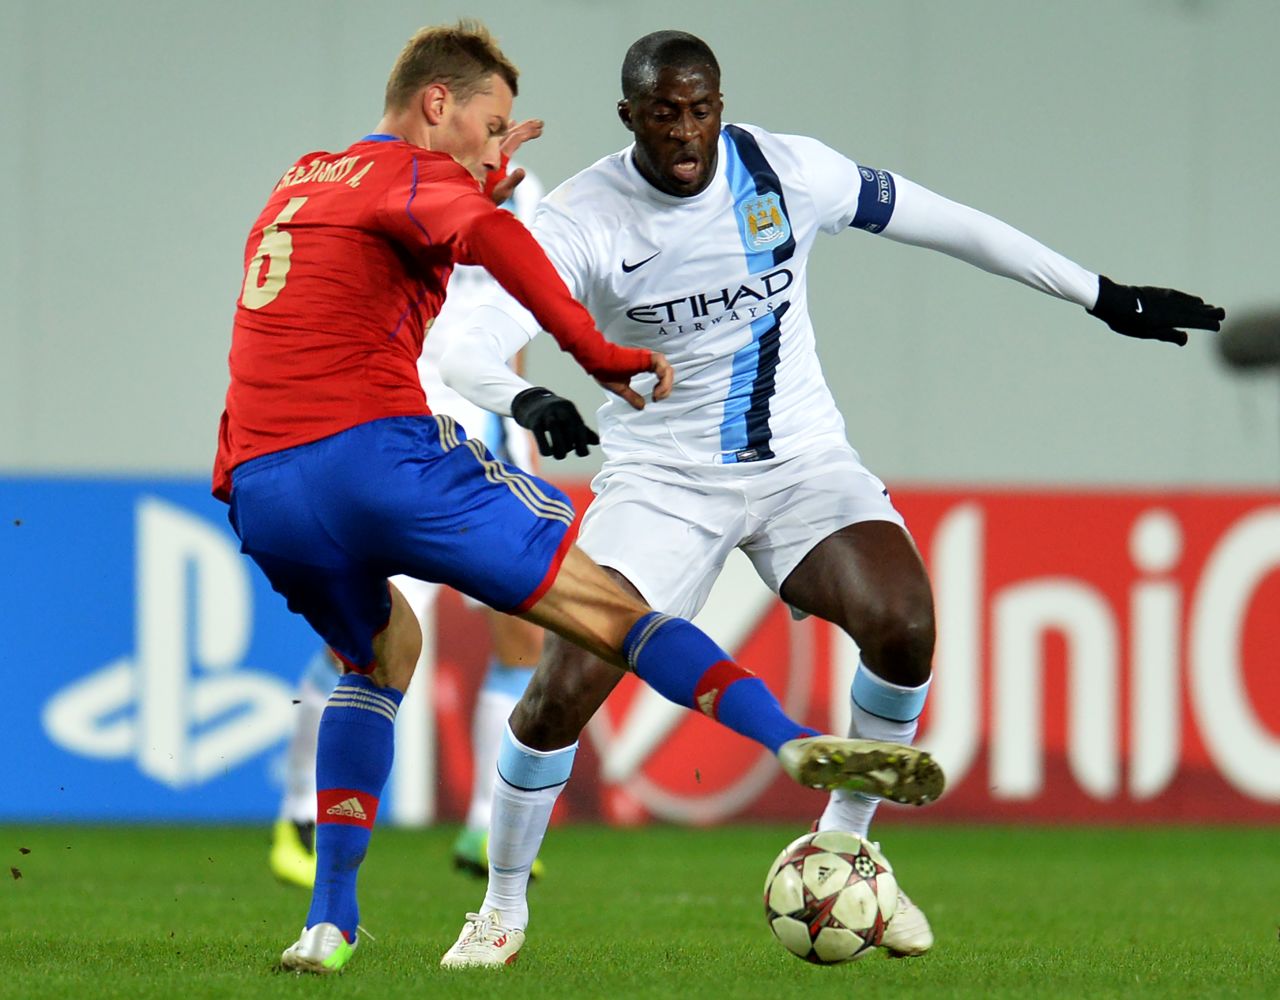 Manchester City's Yaya Toure says he was subjected to "monkey chants" during a European Champions League match against CSKA Moscow in 2013.